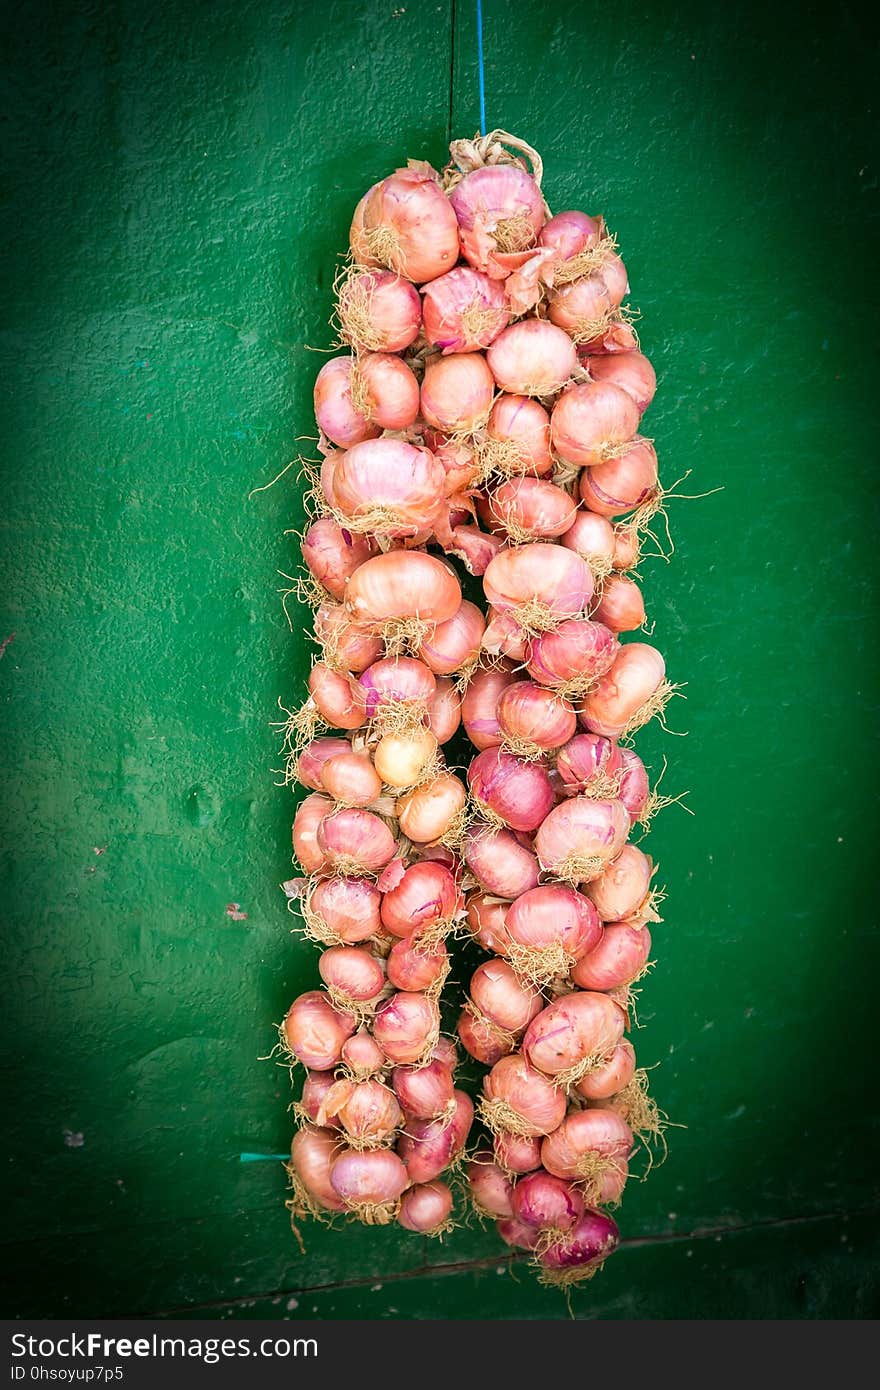 A hanging bag of onion with green background in morrocco